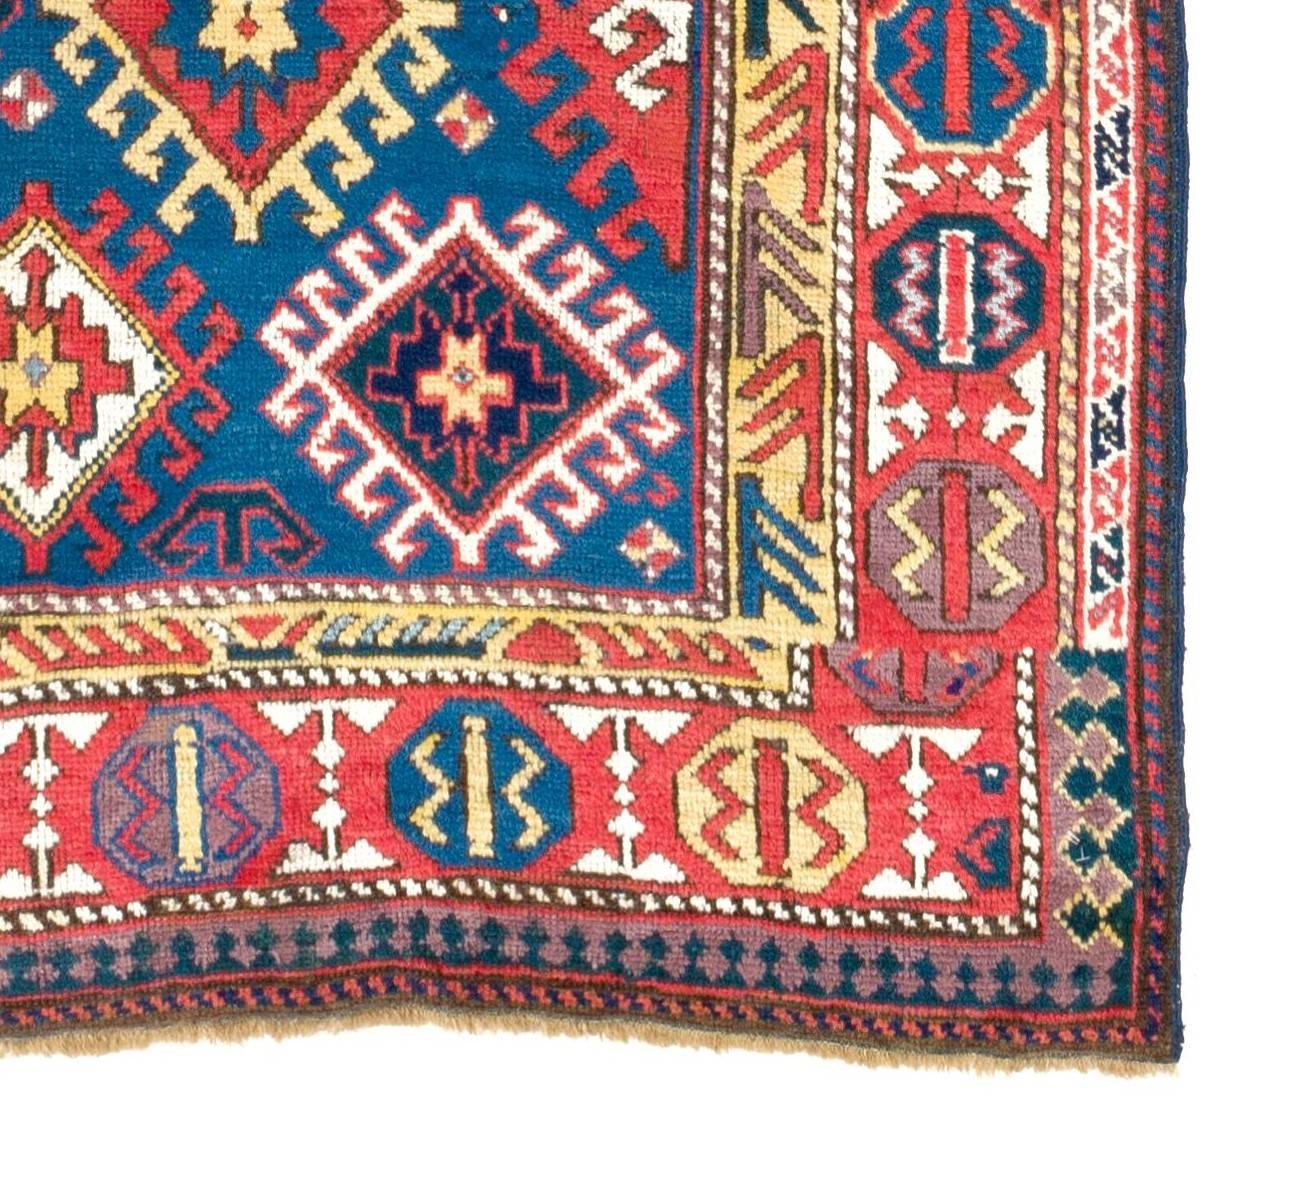 Hand-Knotted Antique South Caucasian Kazak Runner Rug. Rare Blue Ground and Wefts. Ca 1880